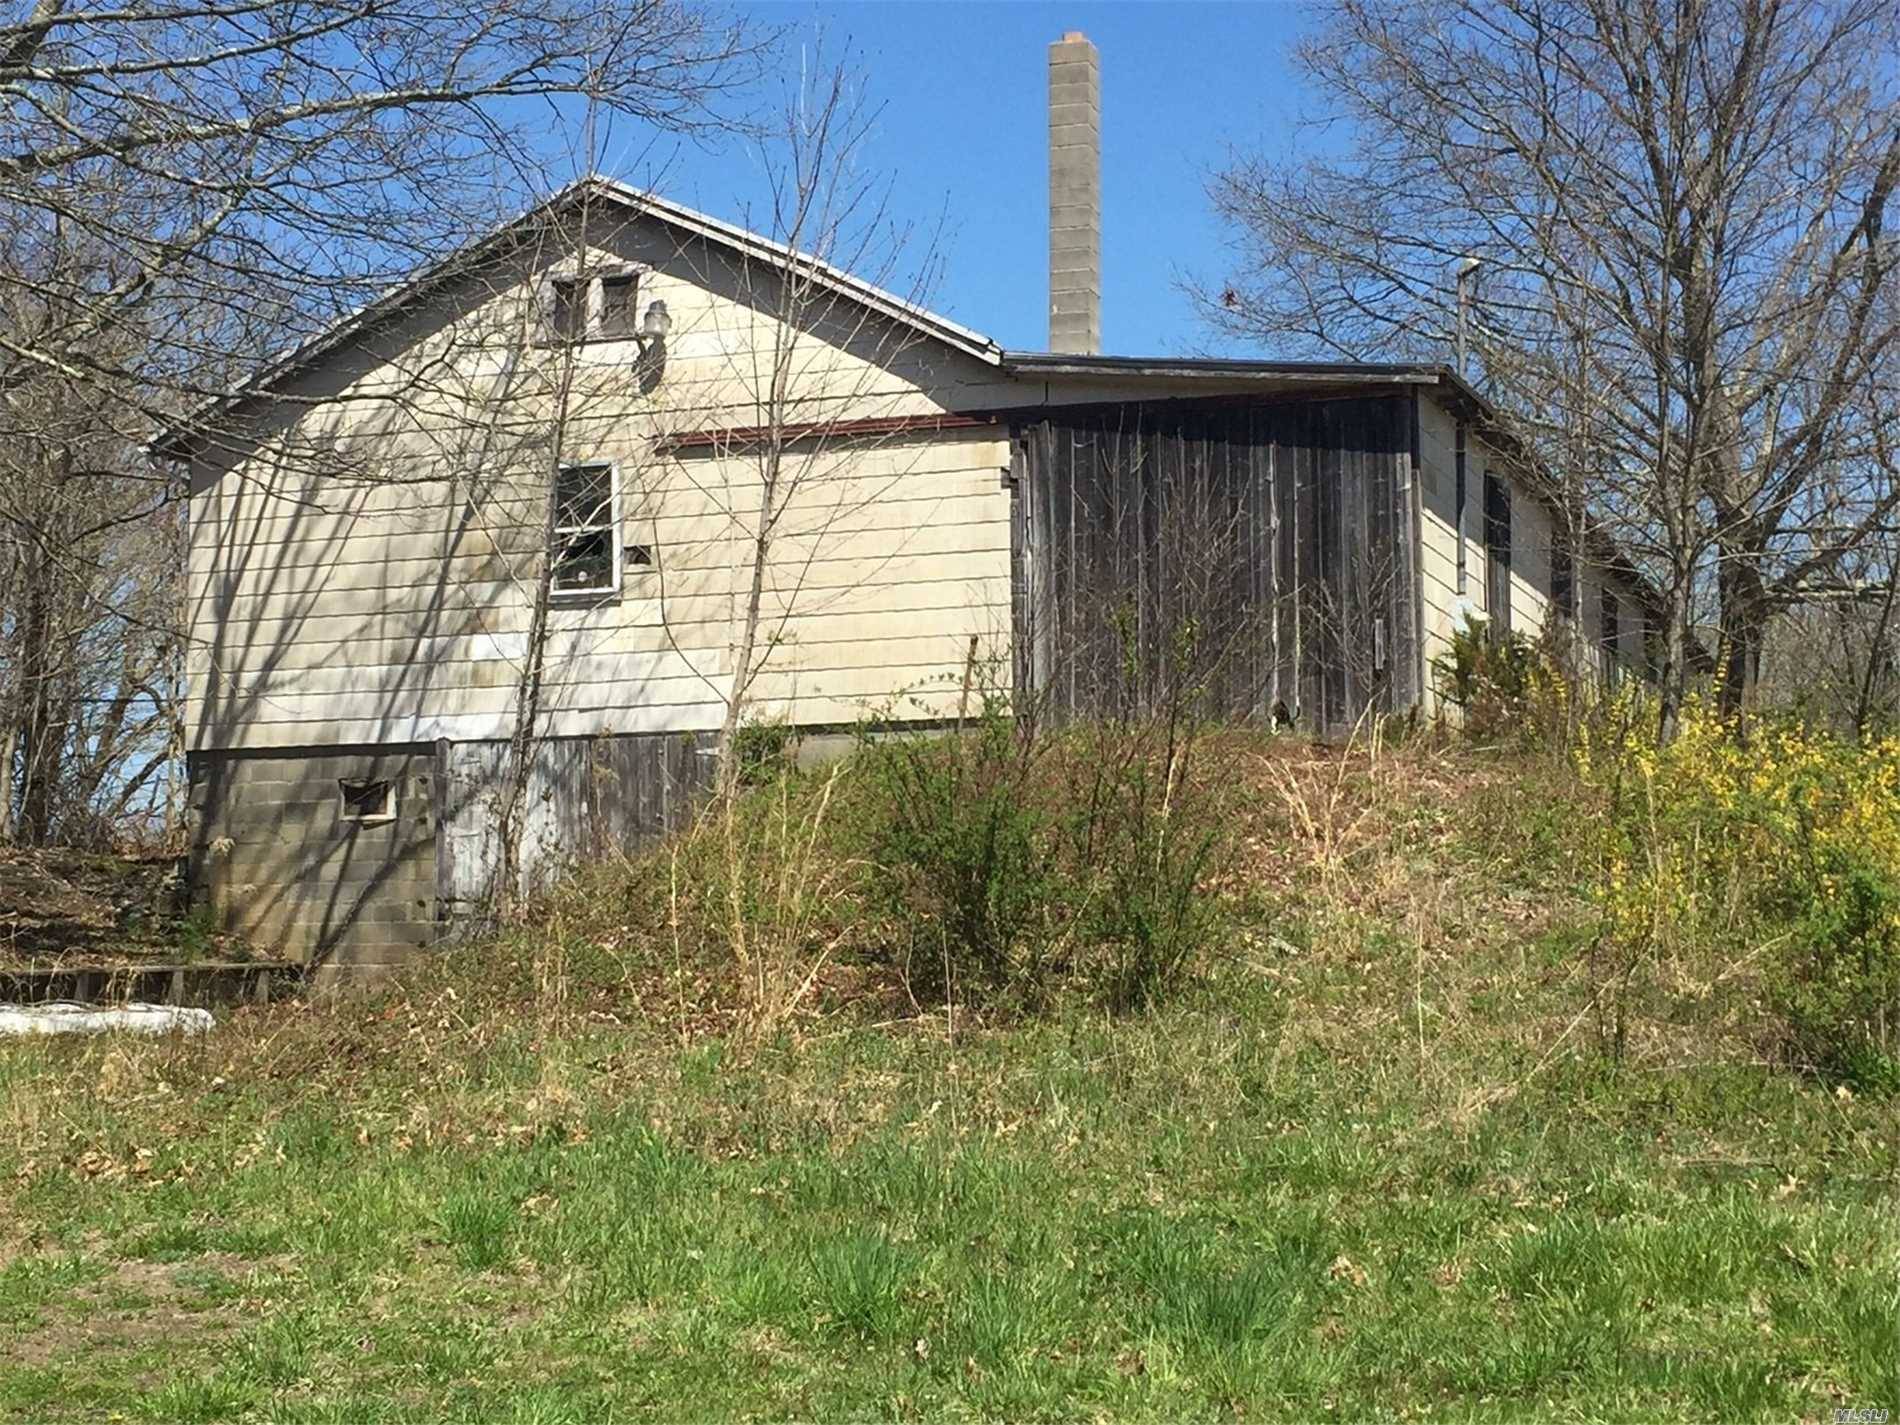 Warehouse/Storage 5600 Sq Feet, 2 Levels To Building,  Taxes Only $5908.